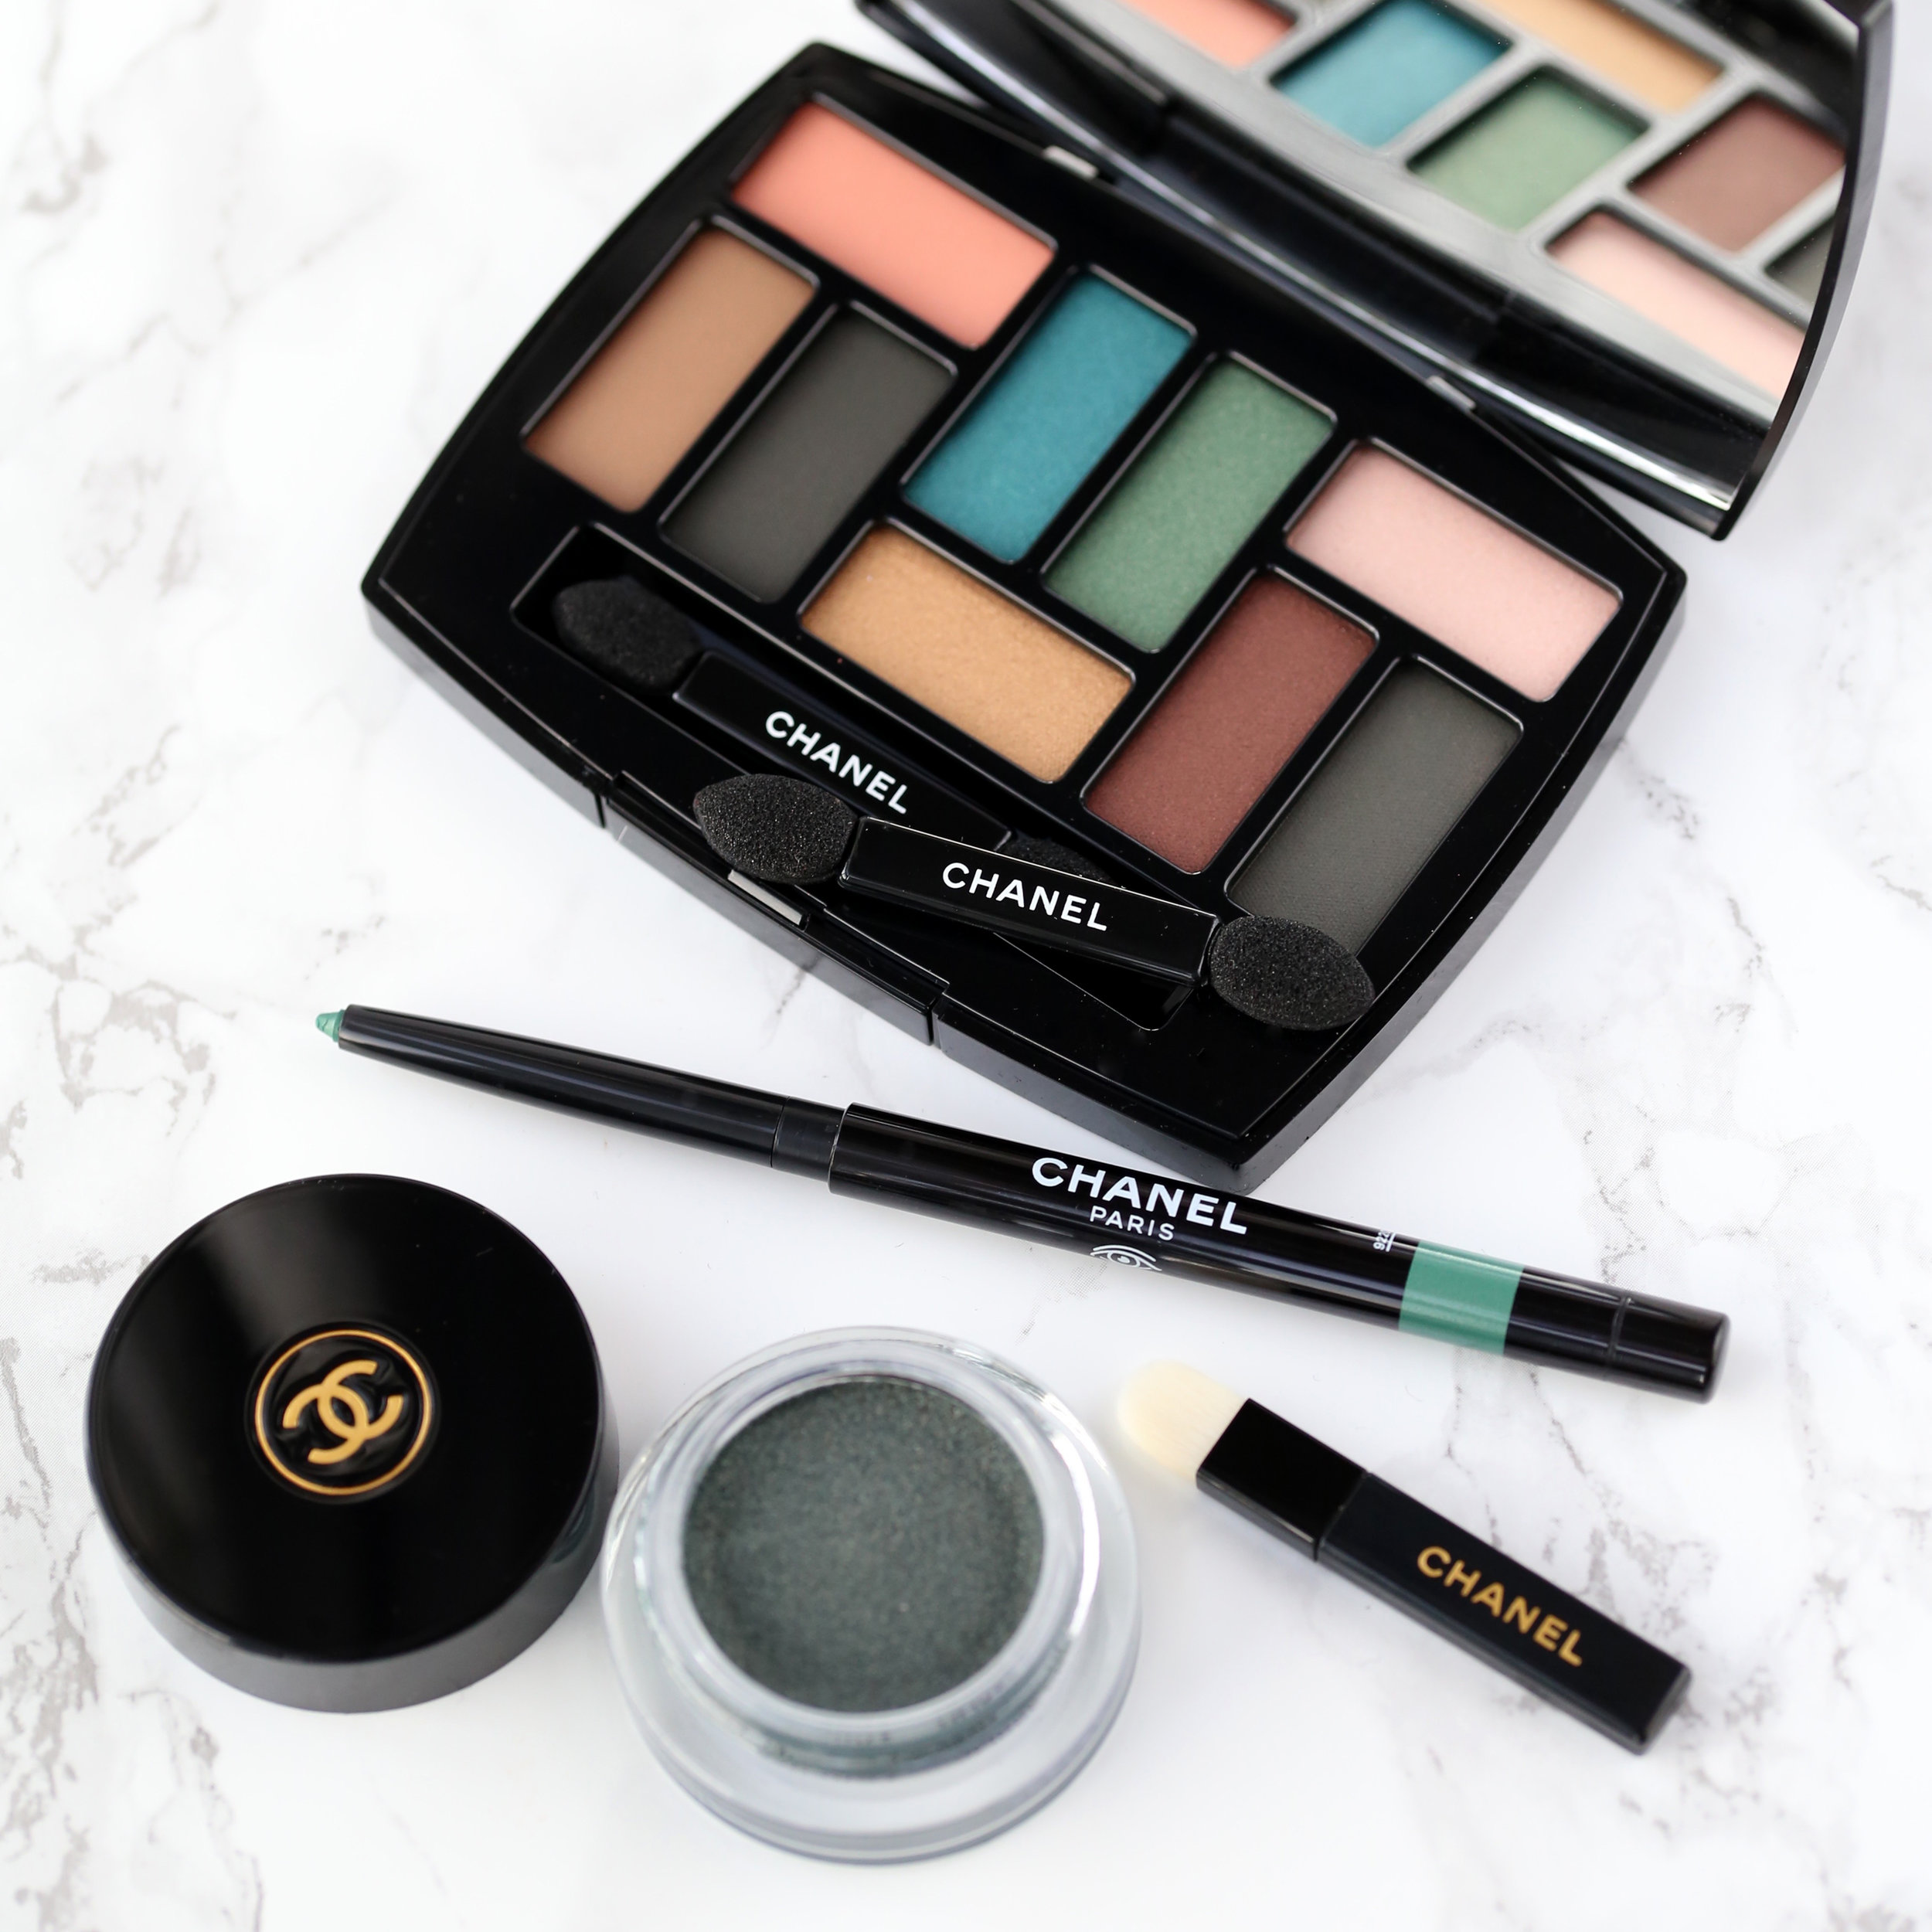 Two Looks with CHANEL's Neapolis New City Eyeshadow Palette